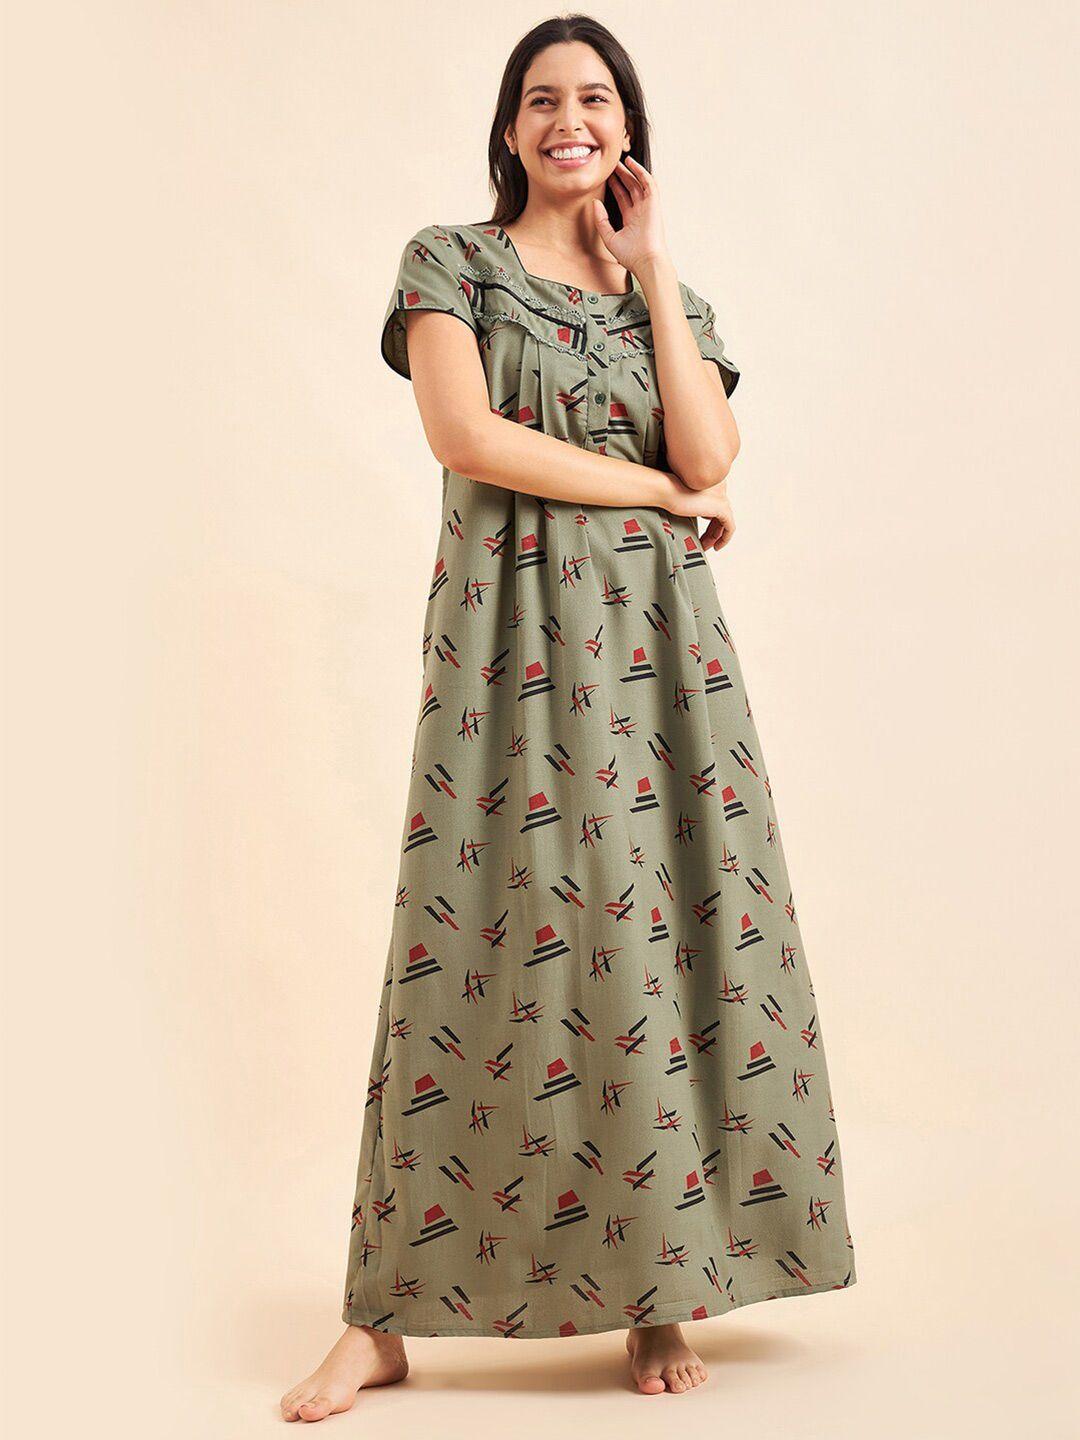 sweet-dreams-green-&-black-geoemtric-printed-maxi-pure-cotton-nightdress